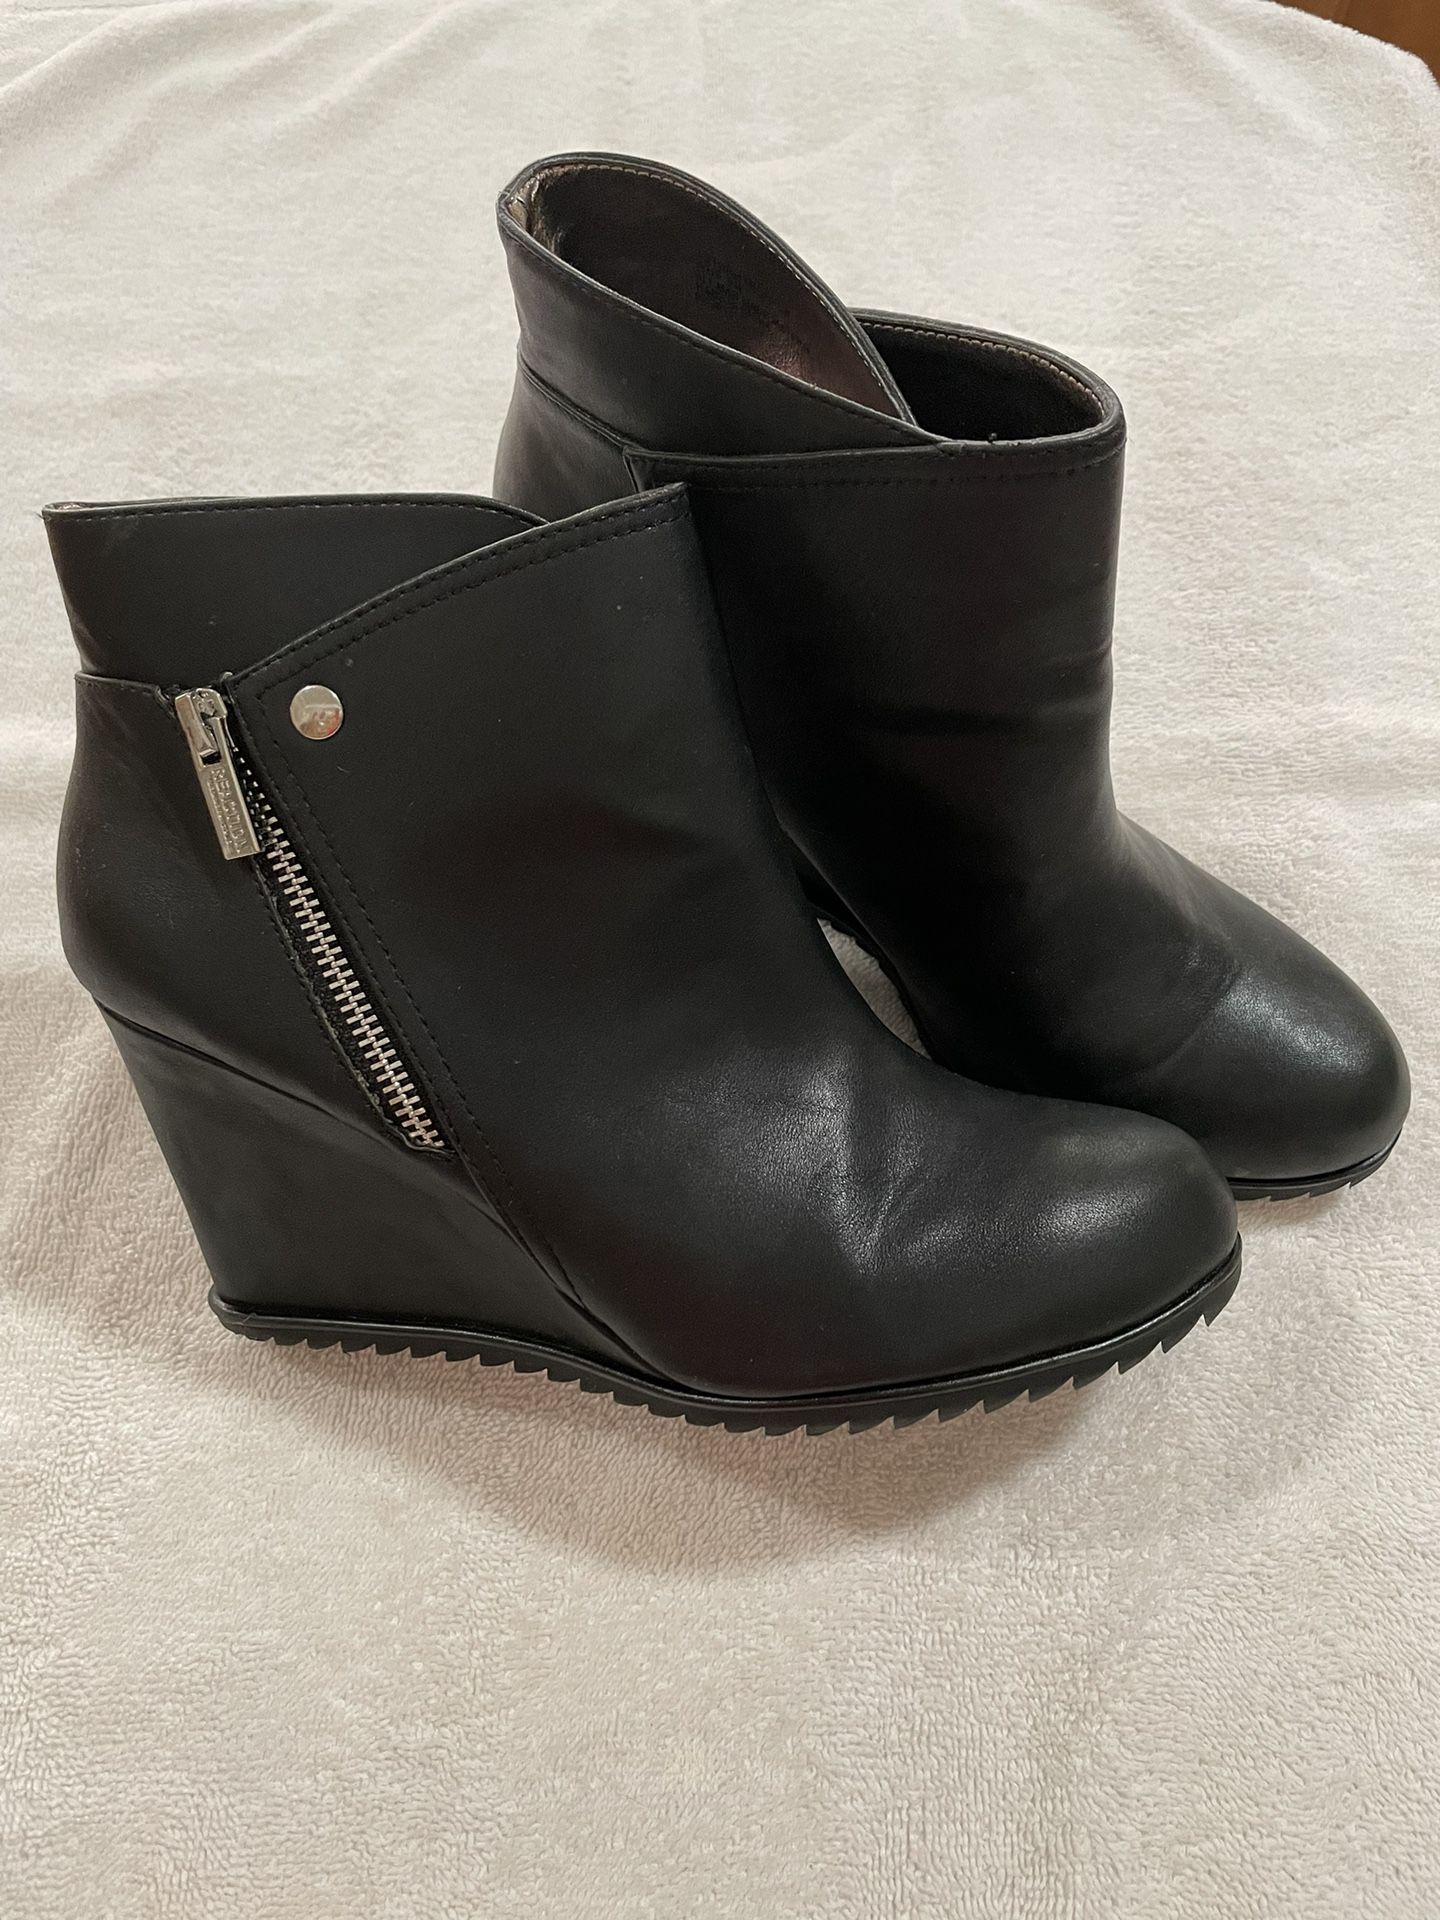 KENNETH COLE REACTION BOOT